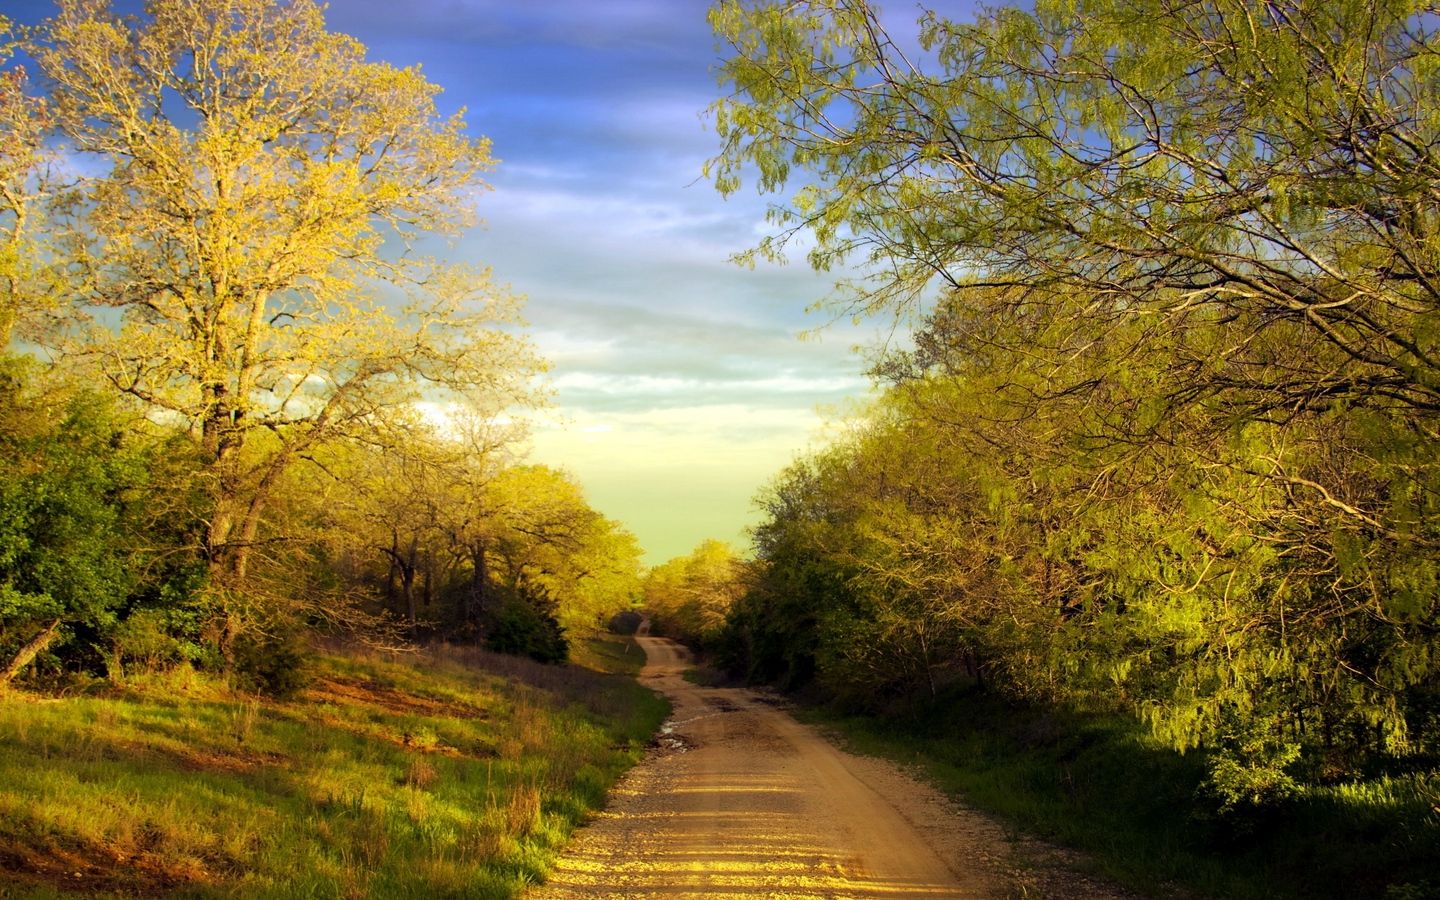 Download wallpaper 1440x900 road, soil, country, trees, spring